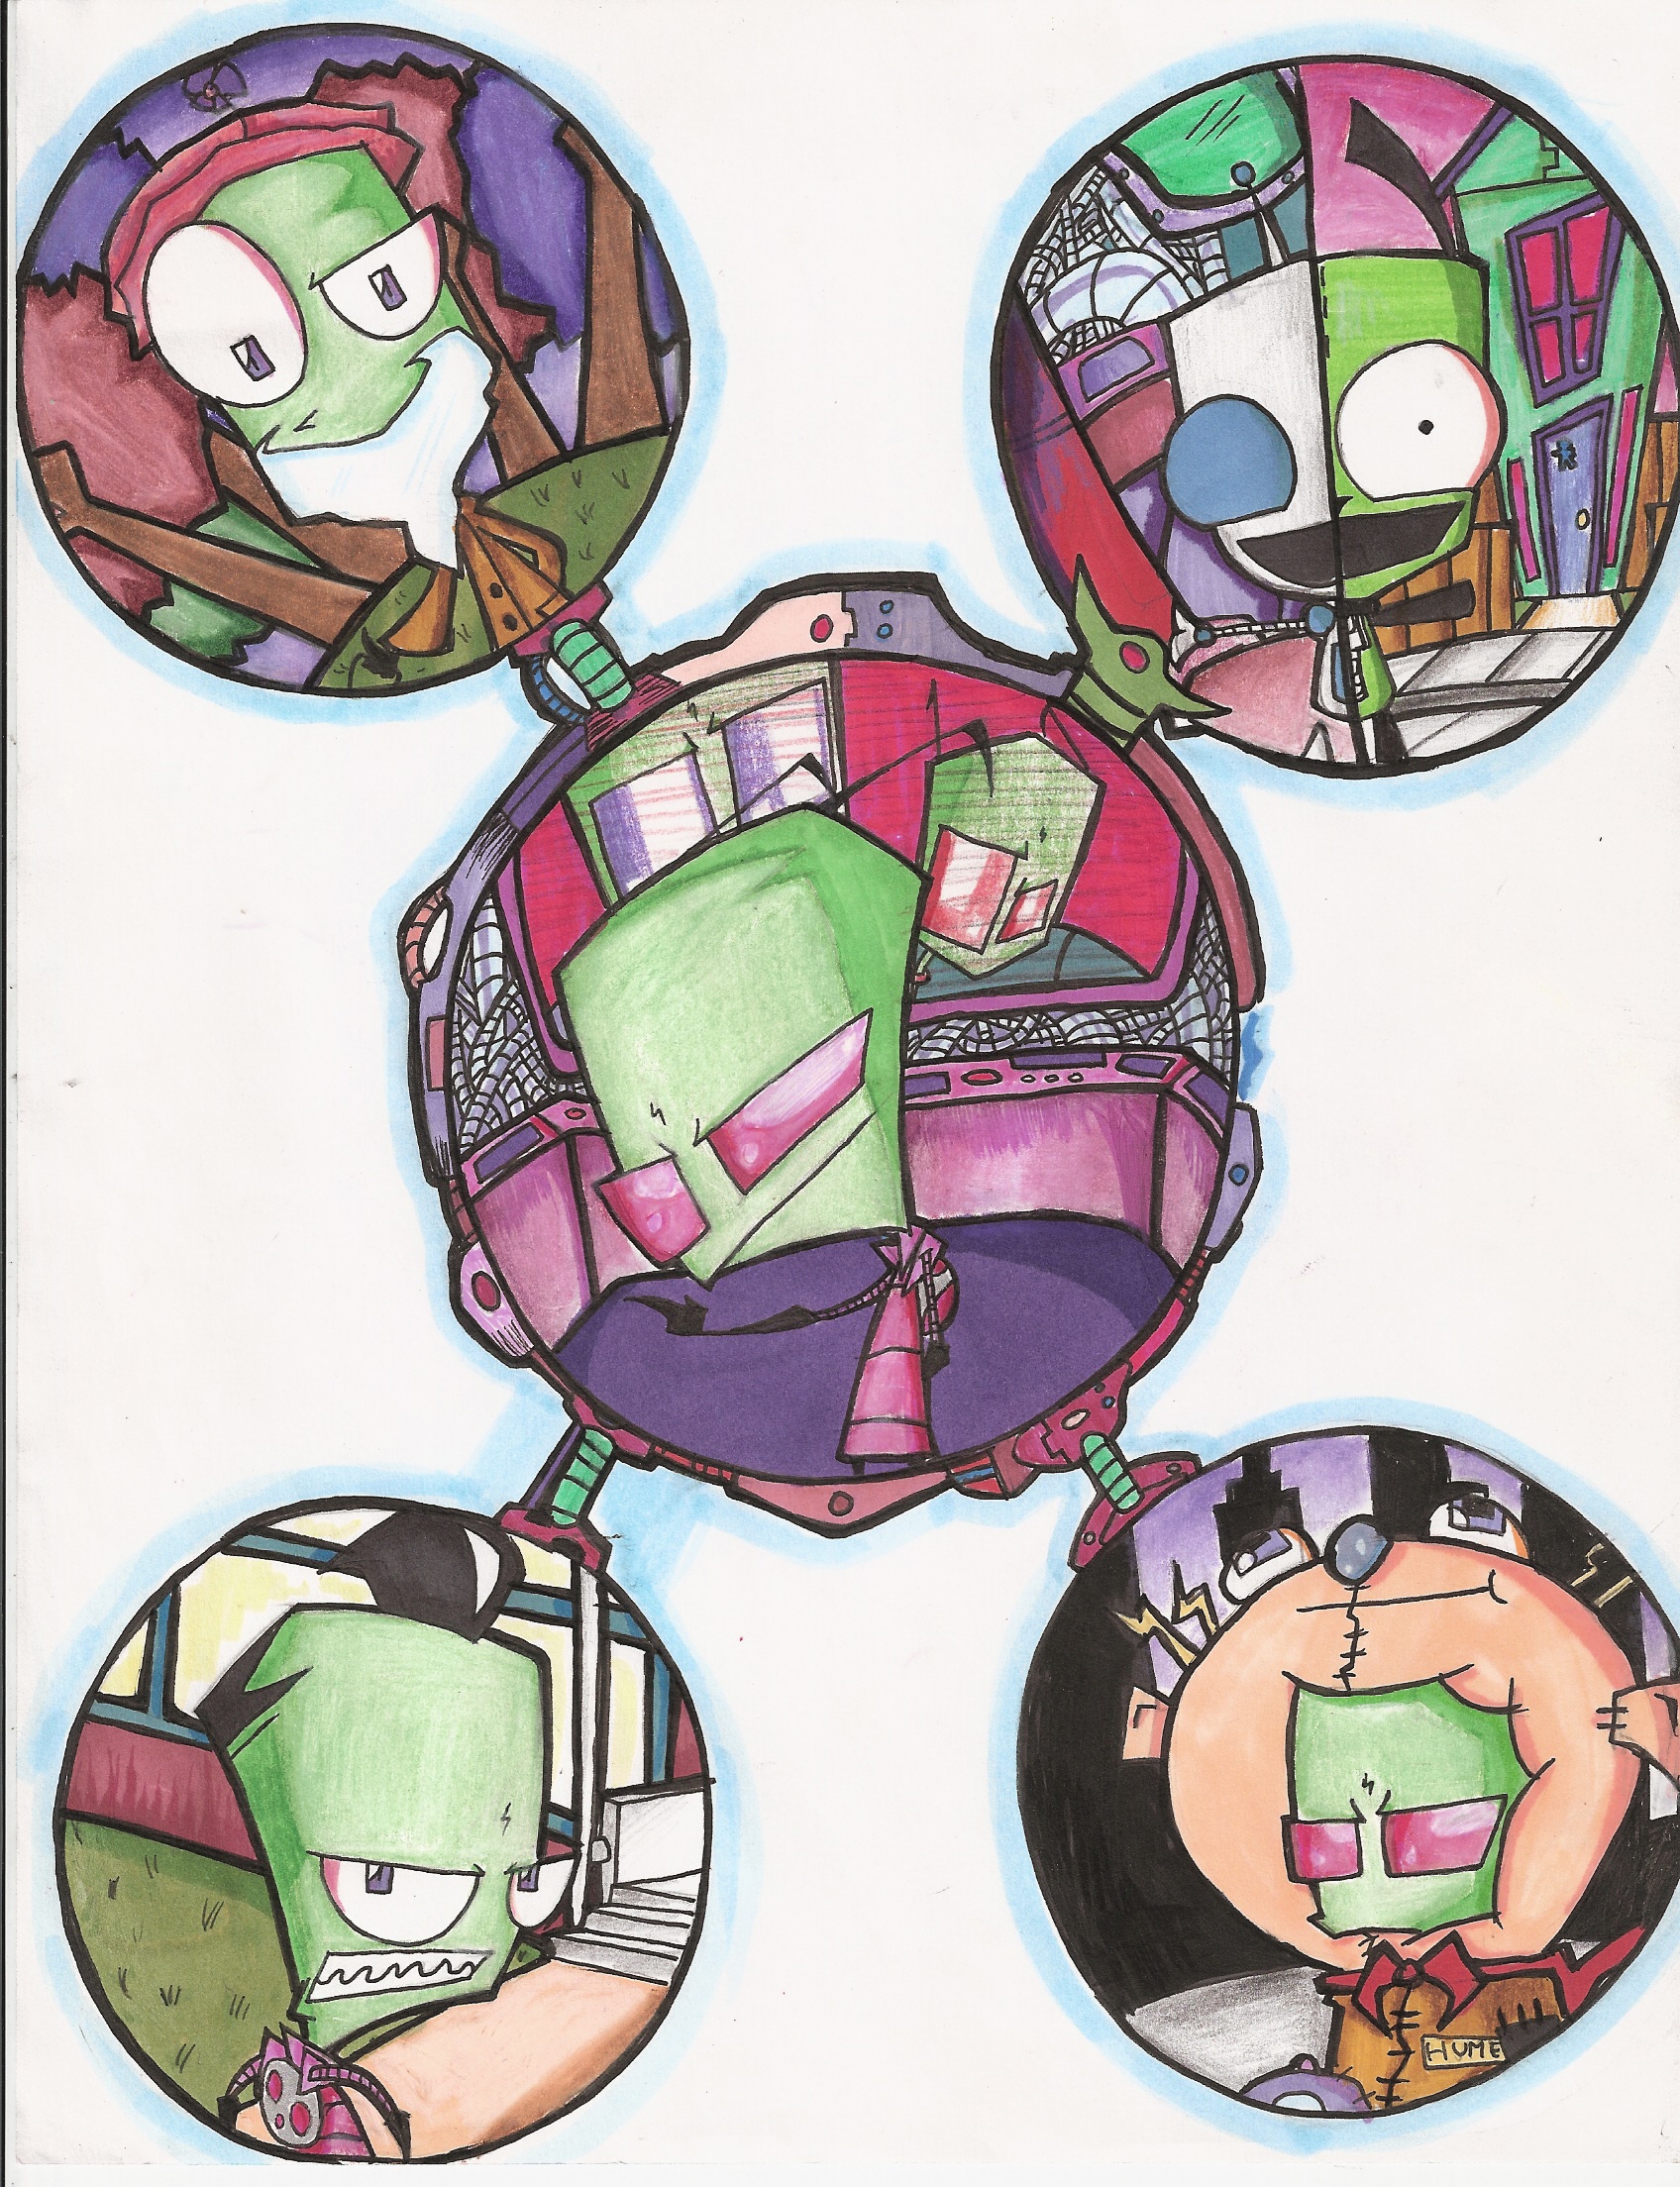 Zimmers Disguise's and Gir by Untalentedsamy13